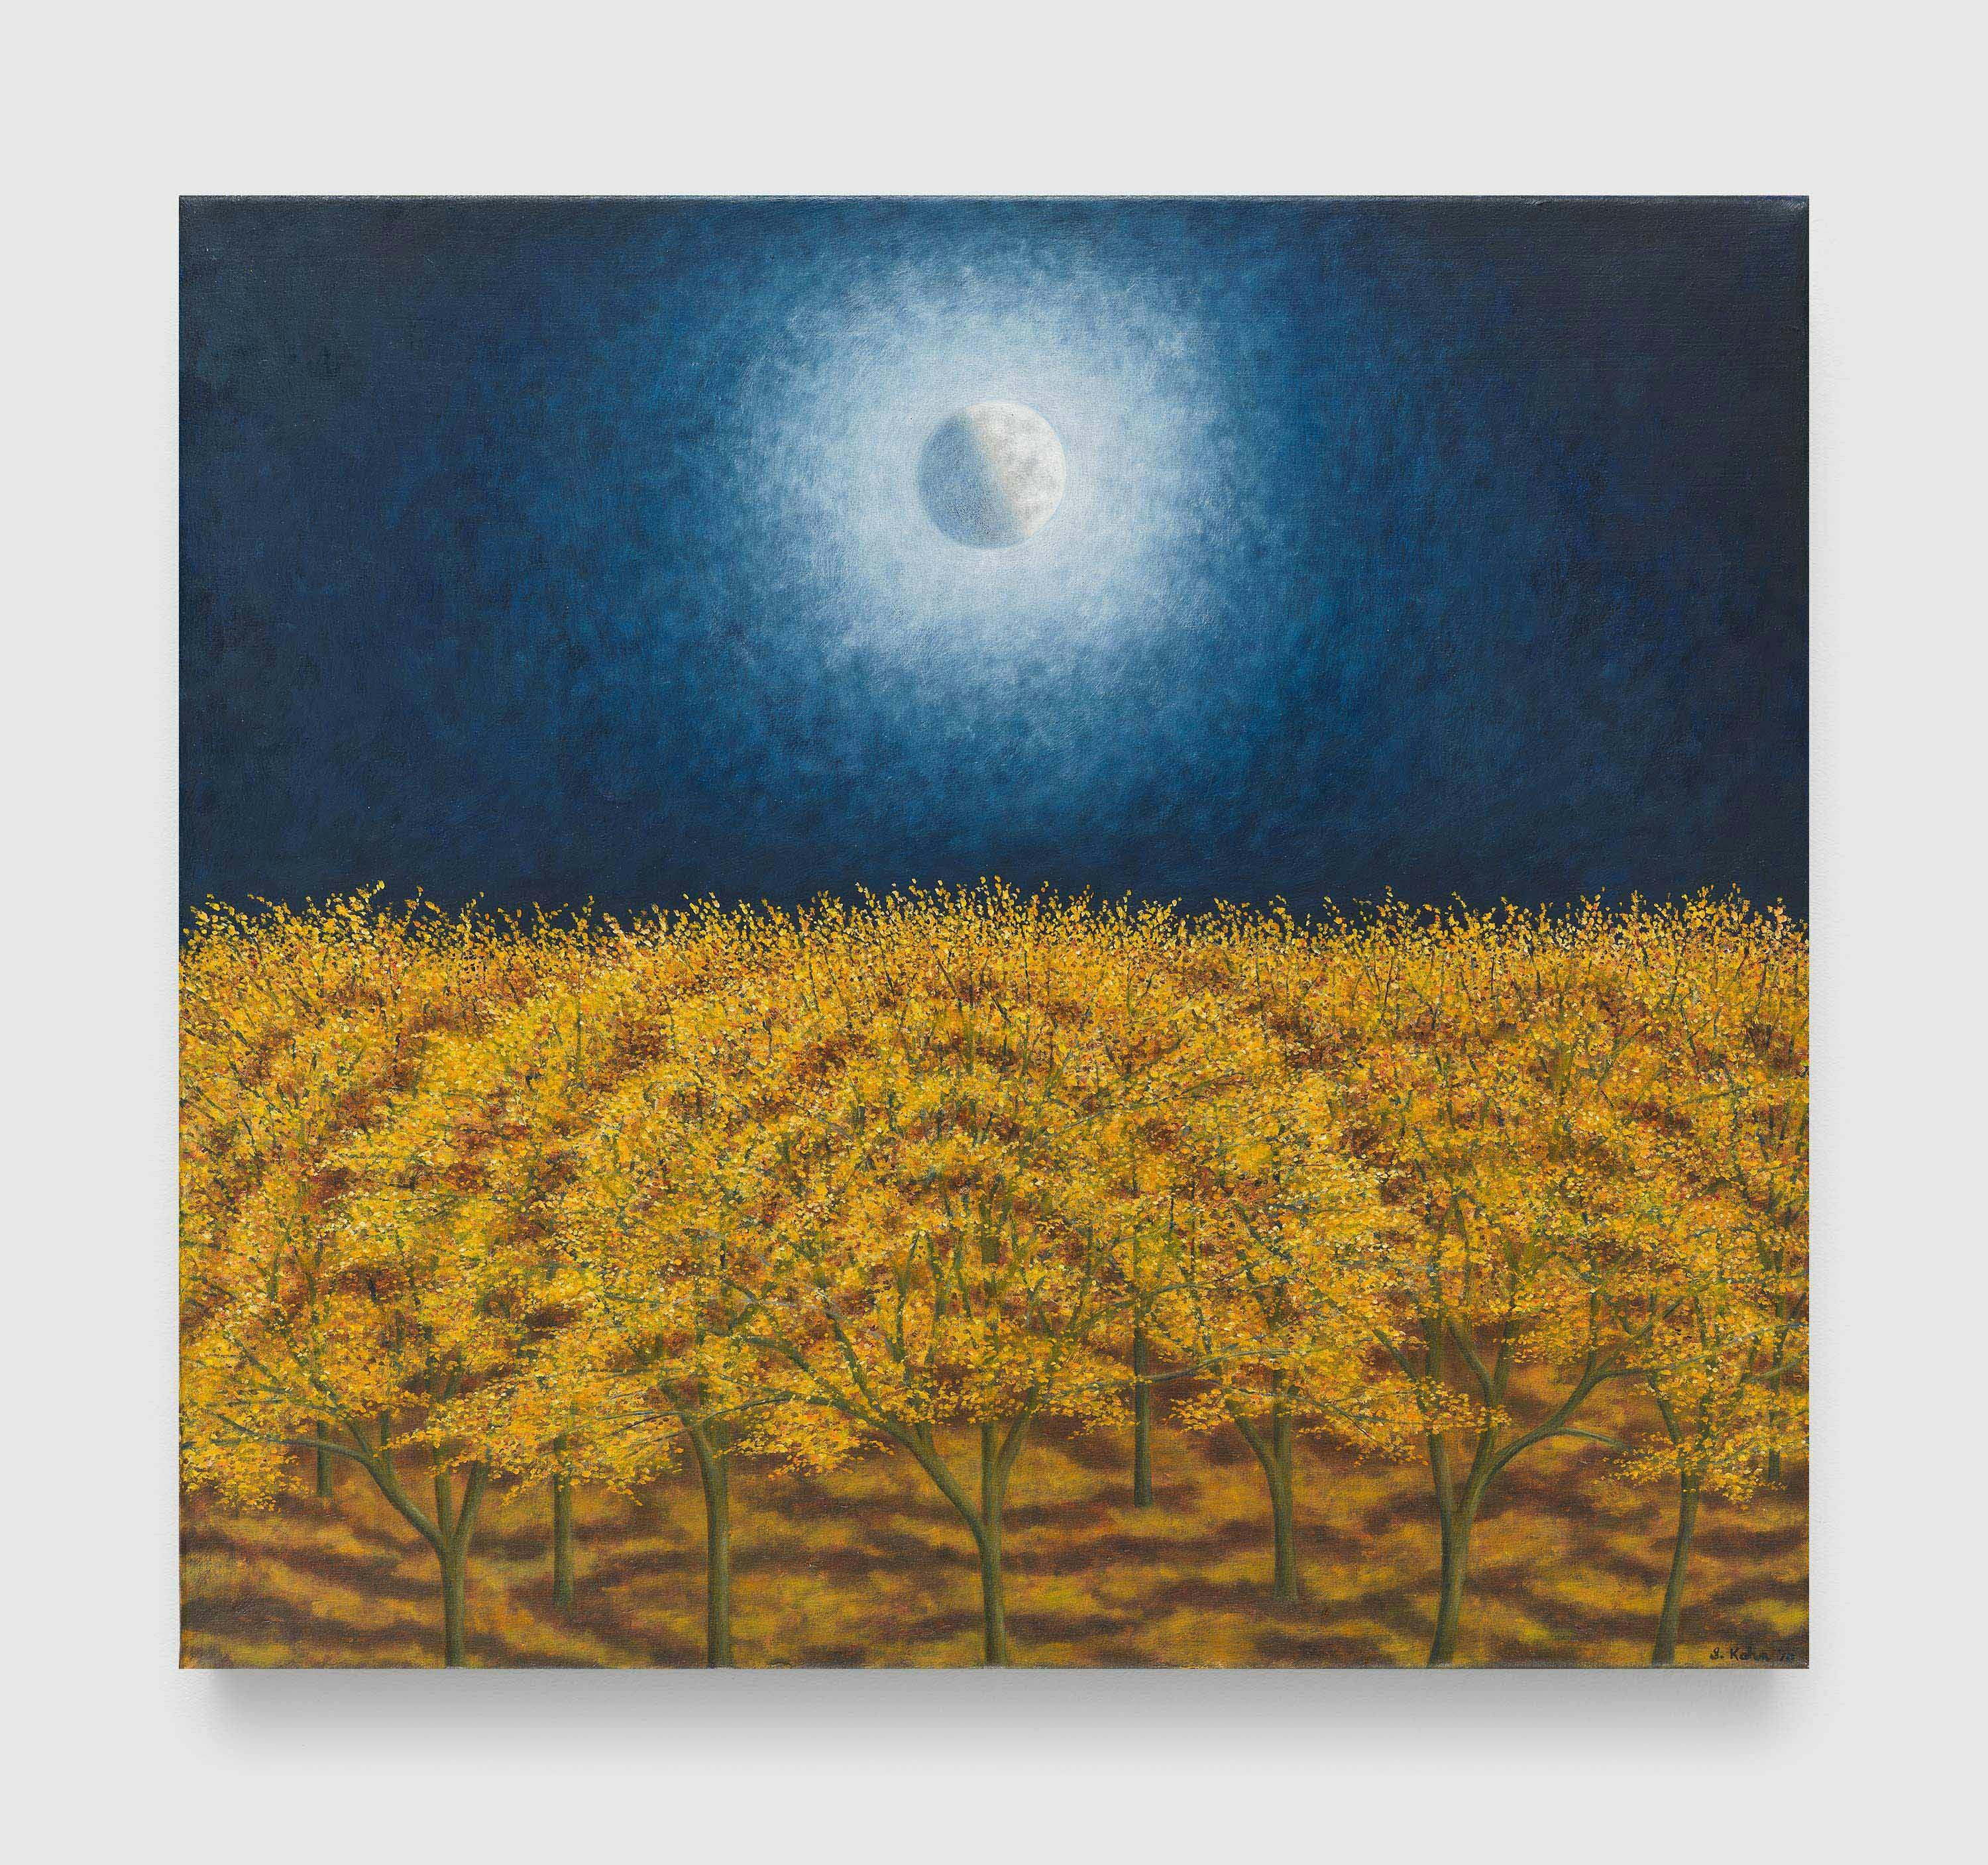 A painting by Scott Kahn, titled Autumn Moon, dated 2014 to 2015.